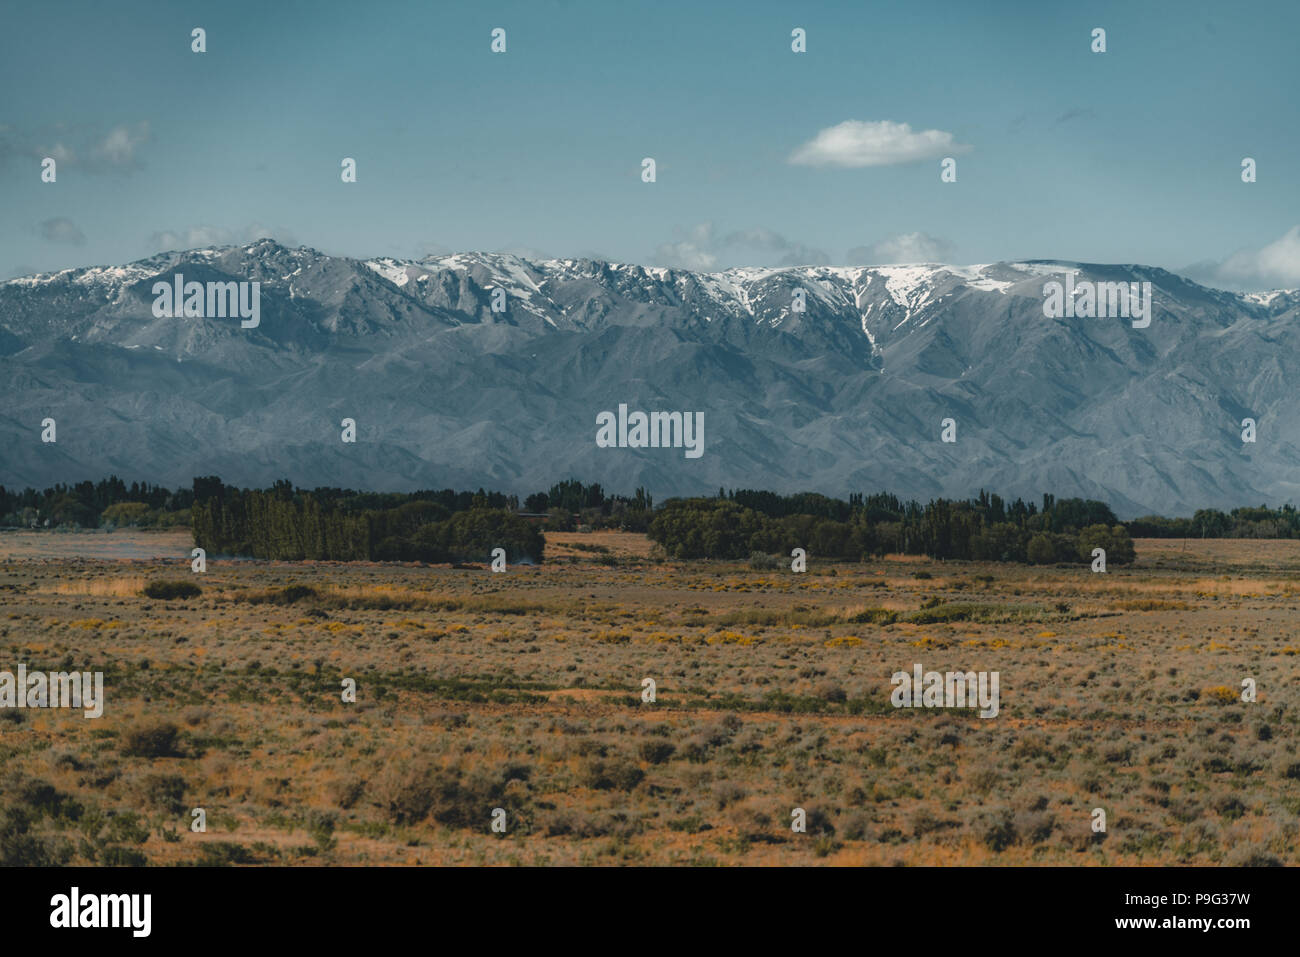 green Kazakhstan Steppe view with Tian Shan mountains in background and grass badlands in foreground Stock Photo